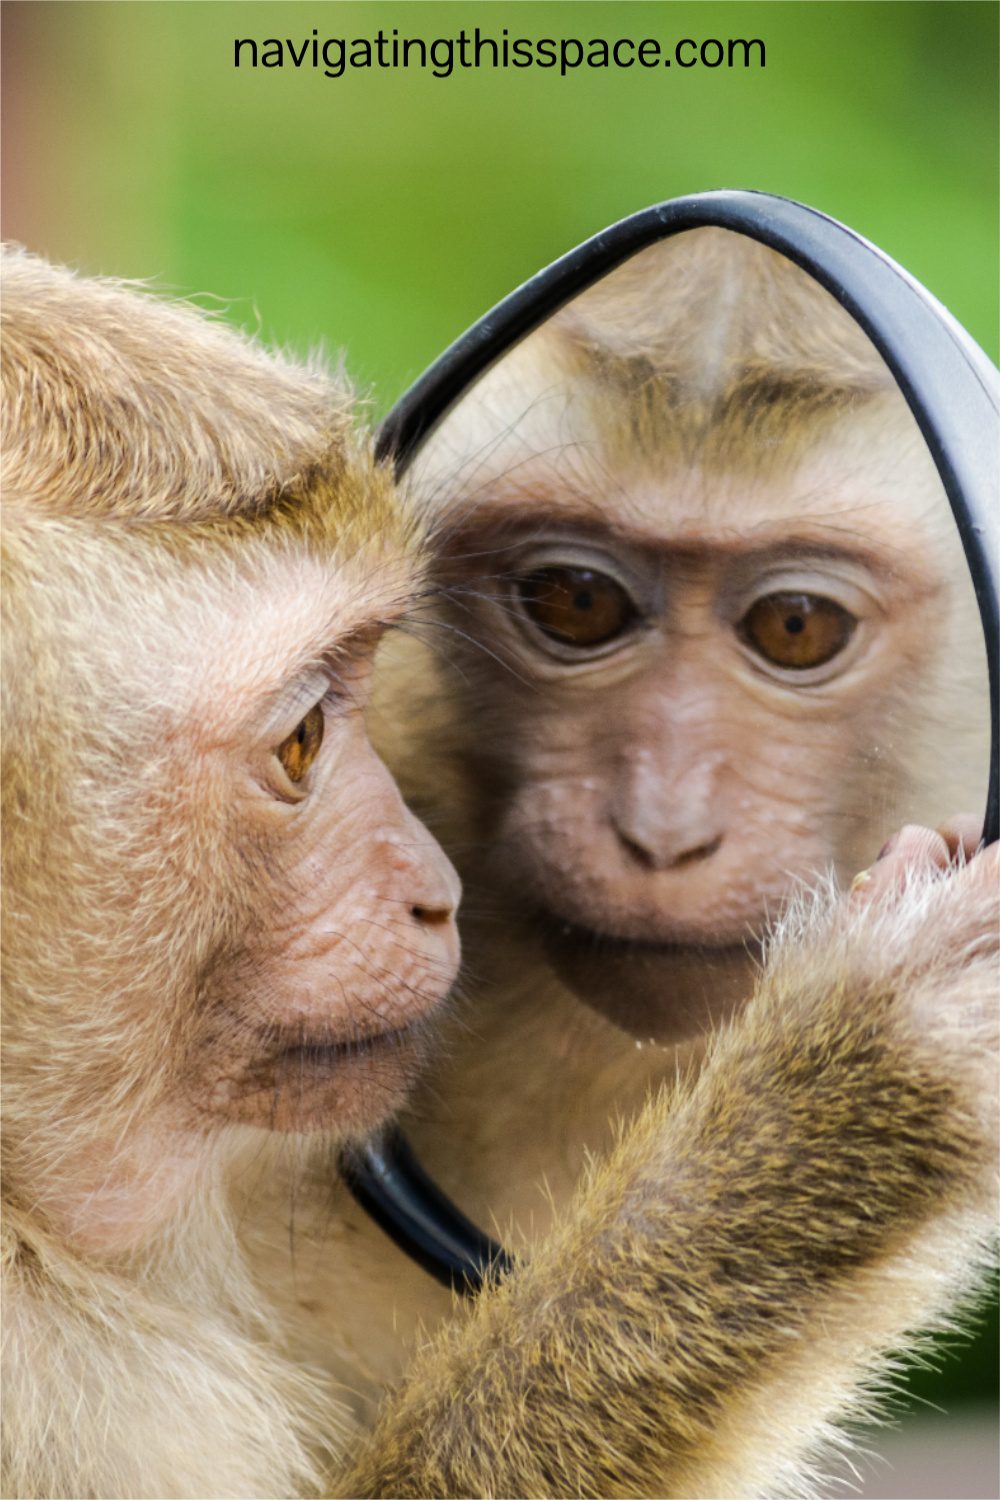 A monkey looking in the mirror indulging in positive self-talk